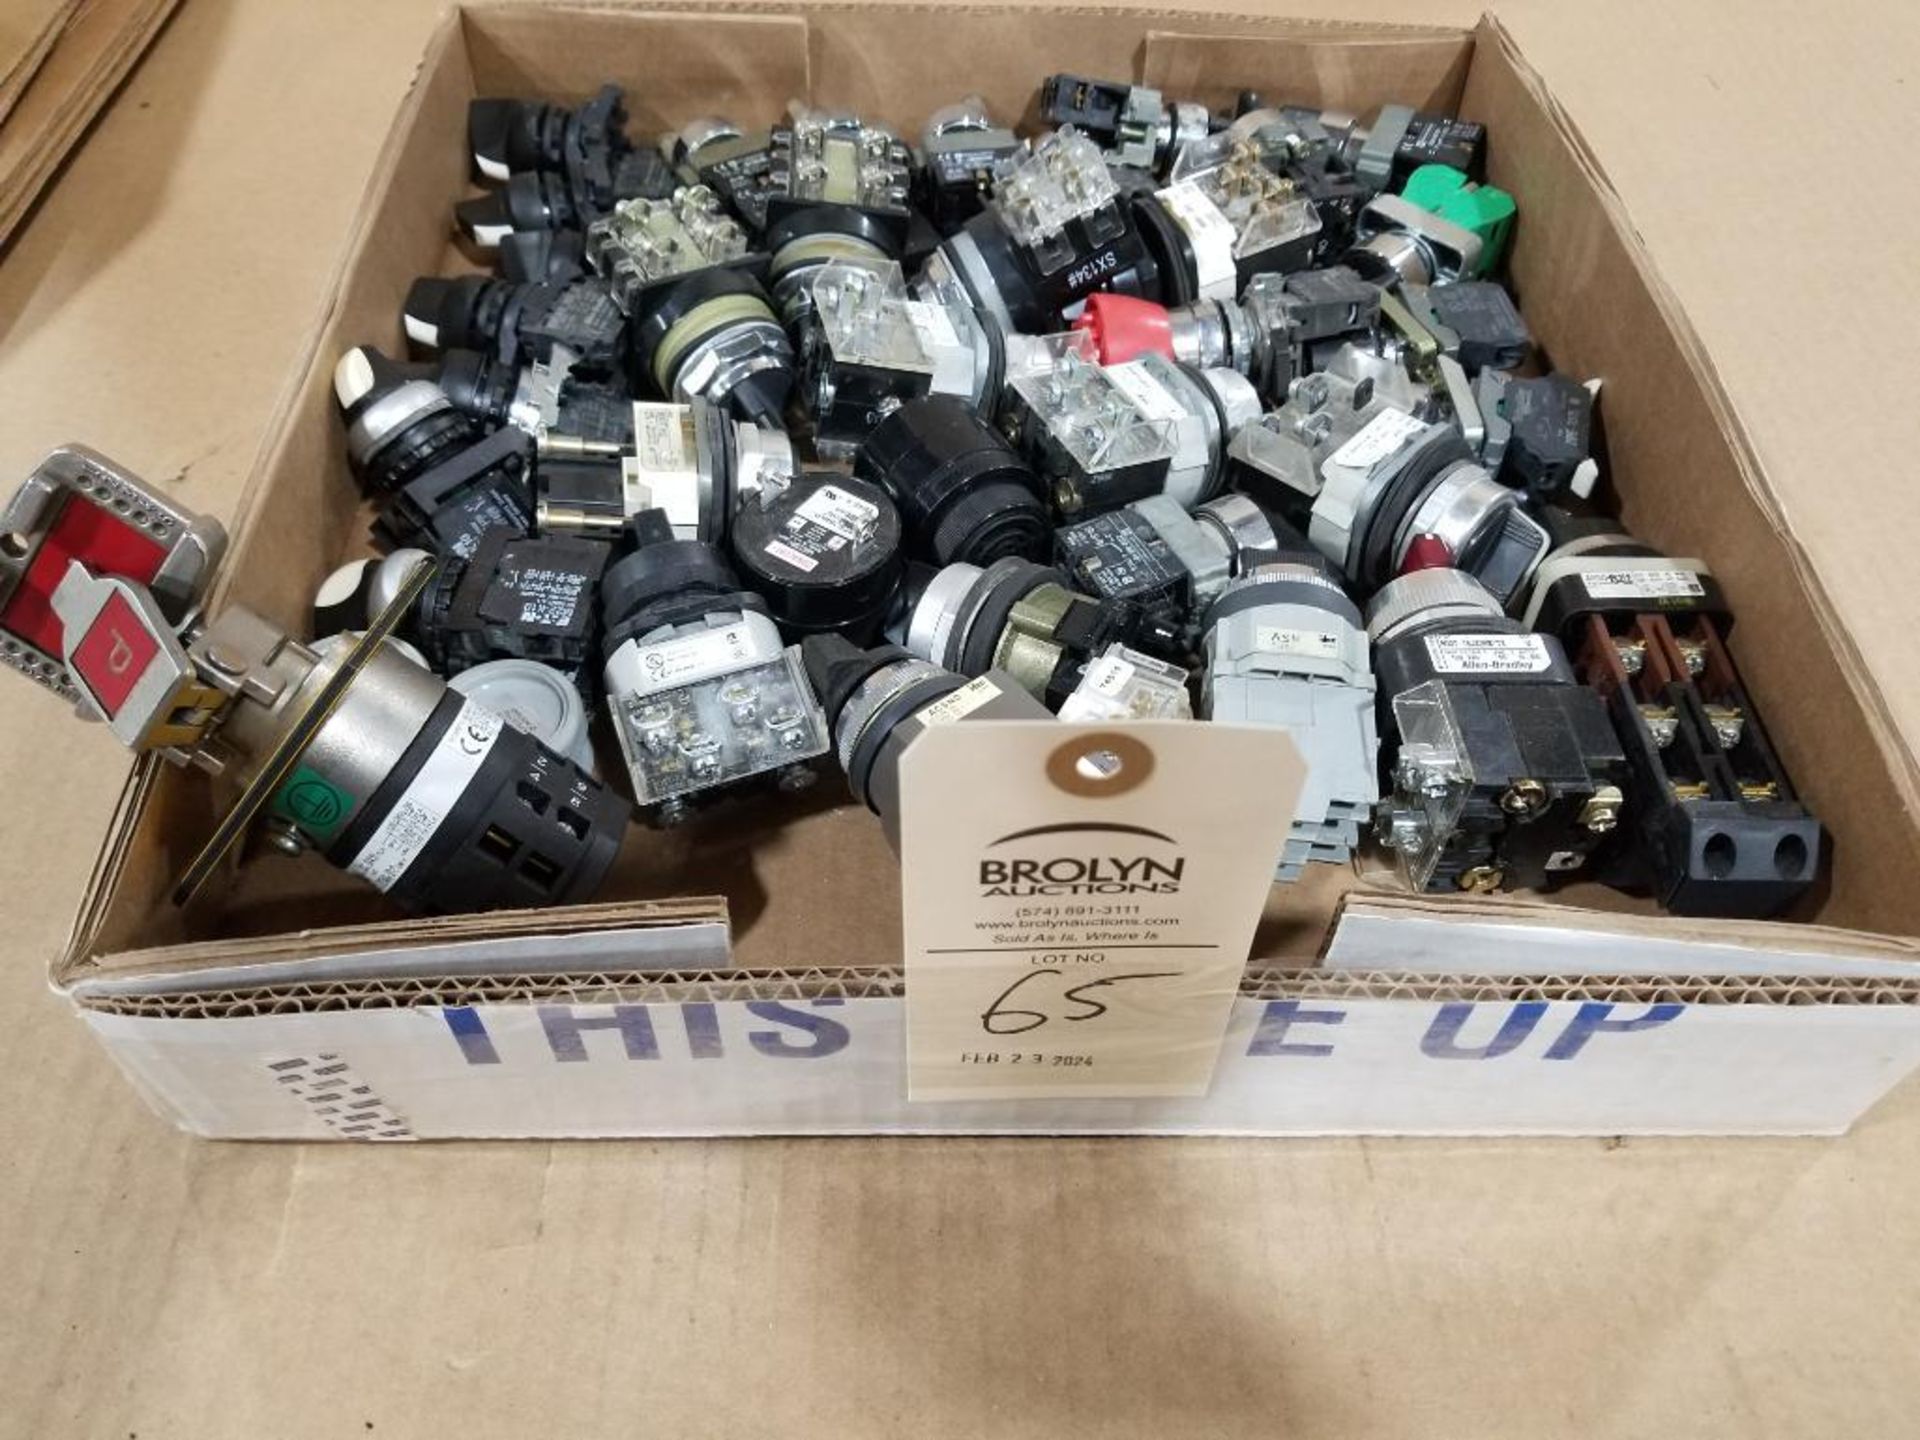 Large assortment of push buttons, pilot lots, switches, etc.